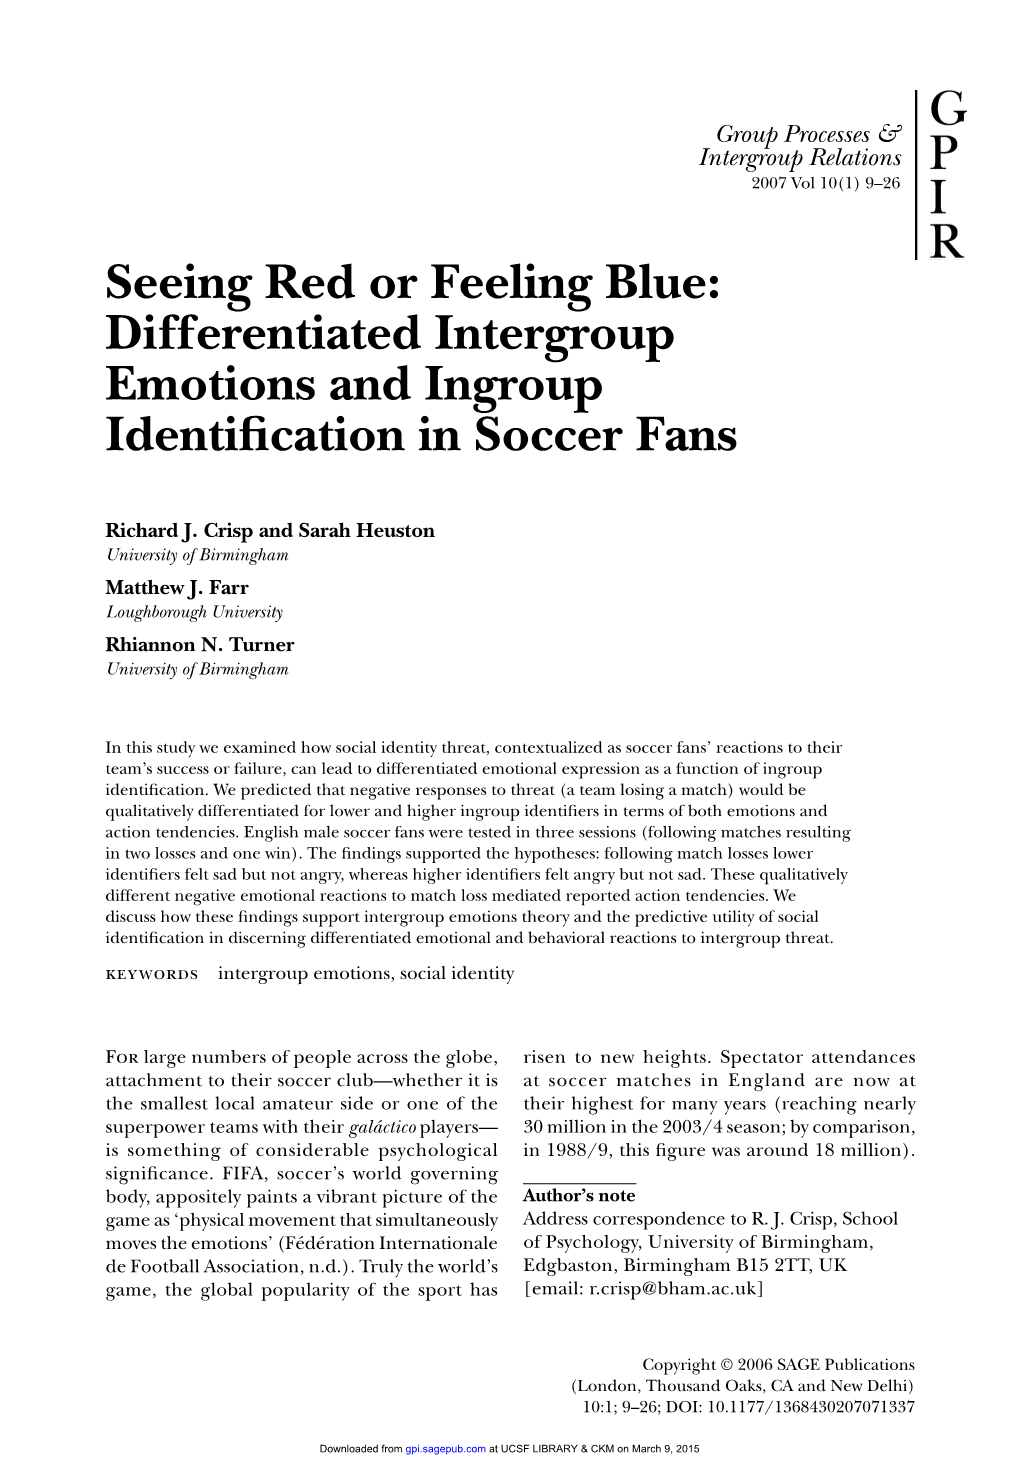 Differentiated Intergroup Emotions and Ingroup Identiﬁ Cation in Soccer Fans